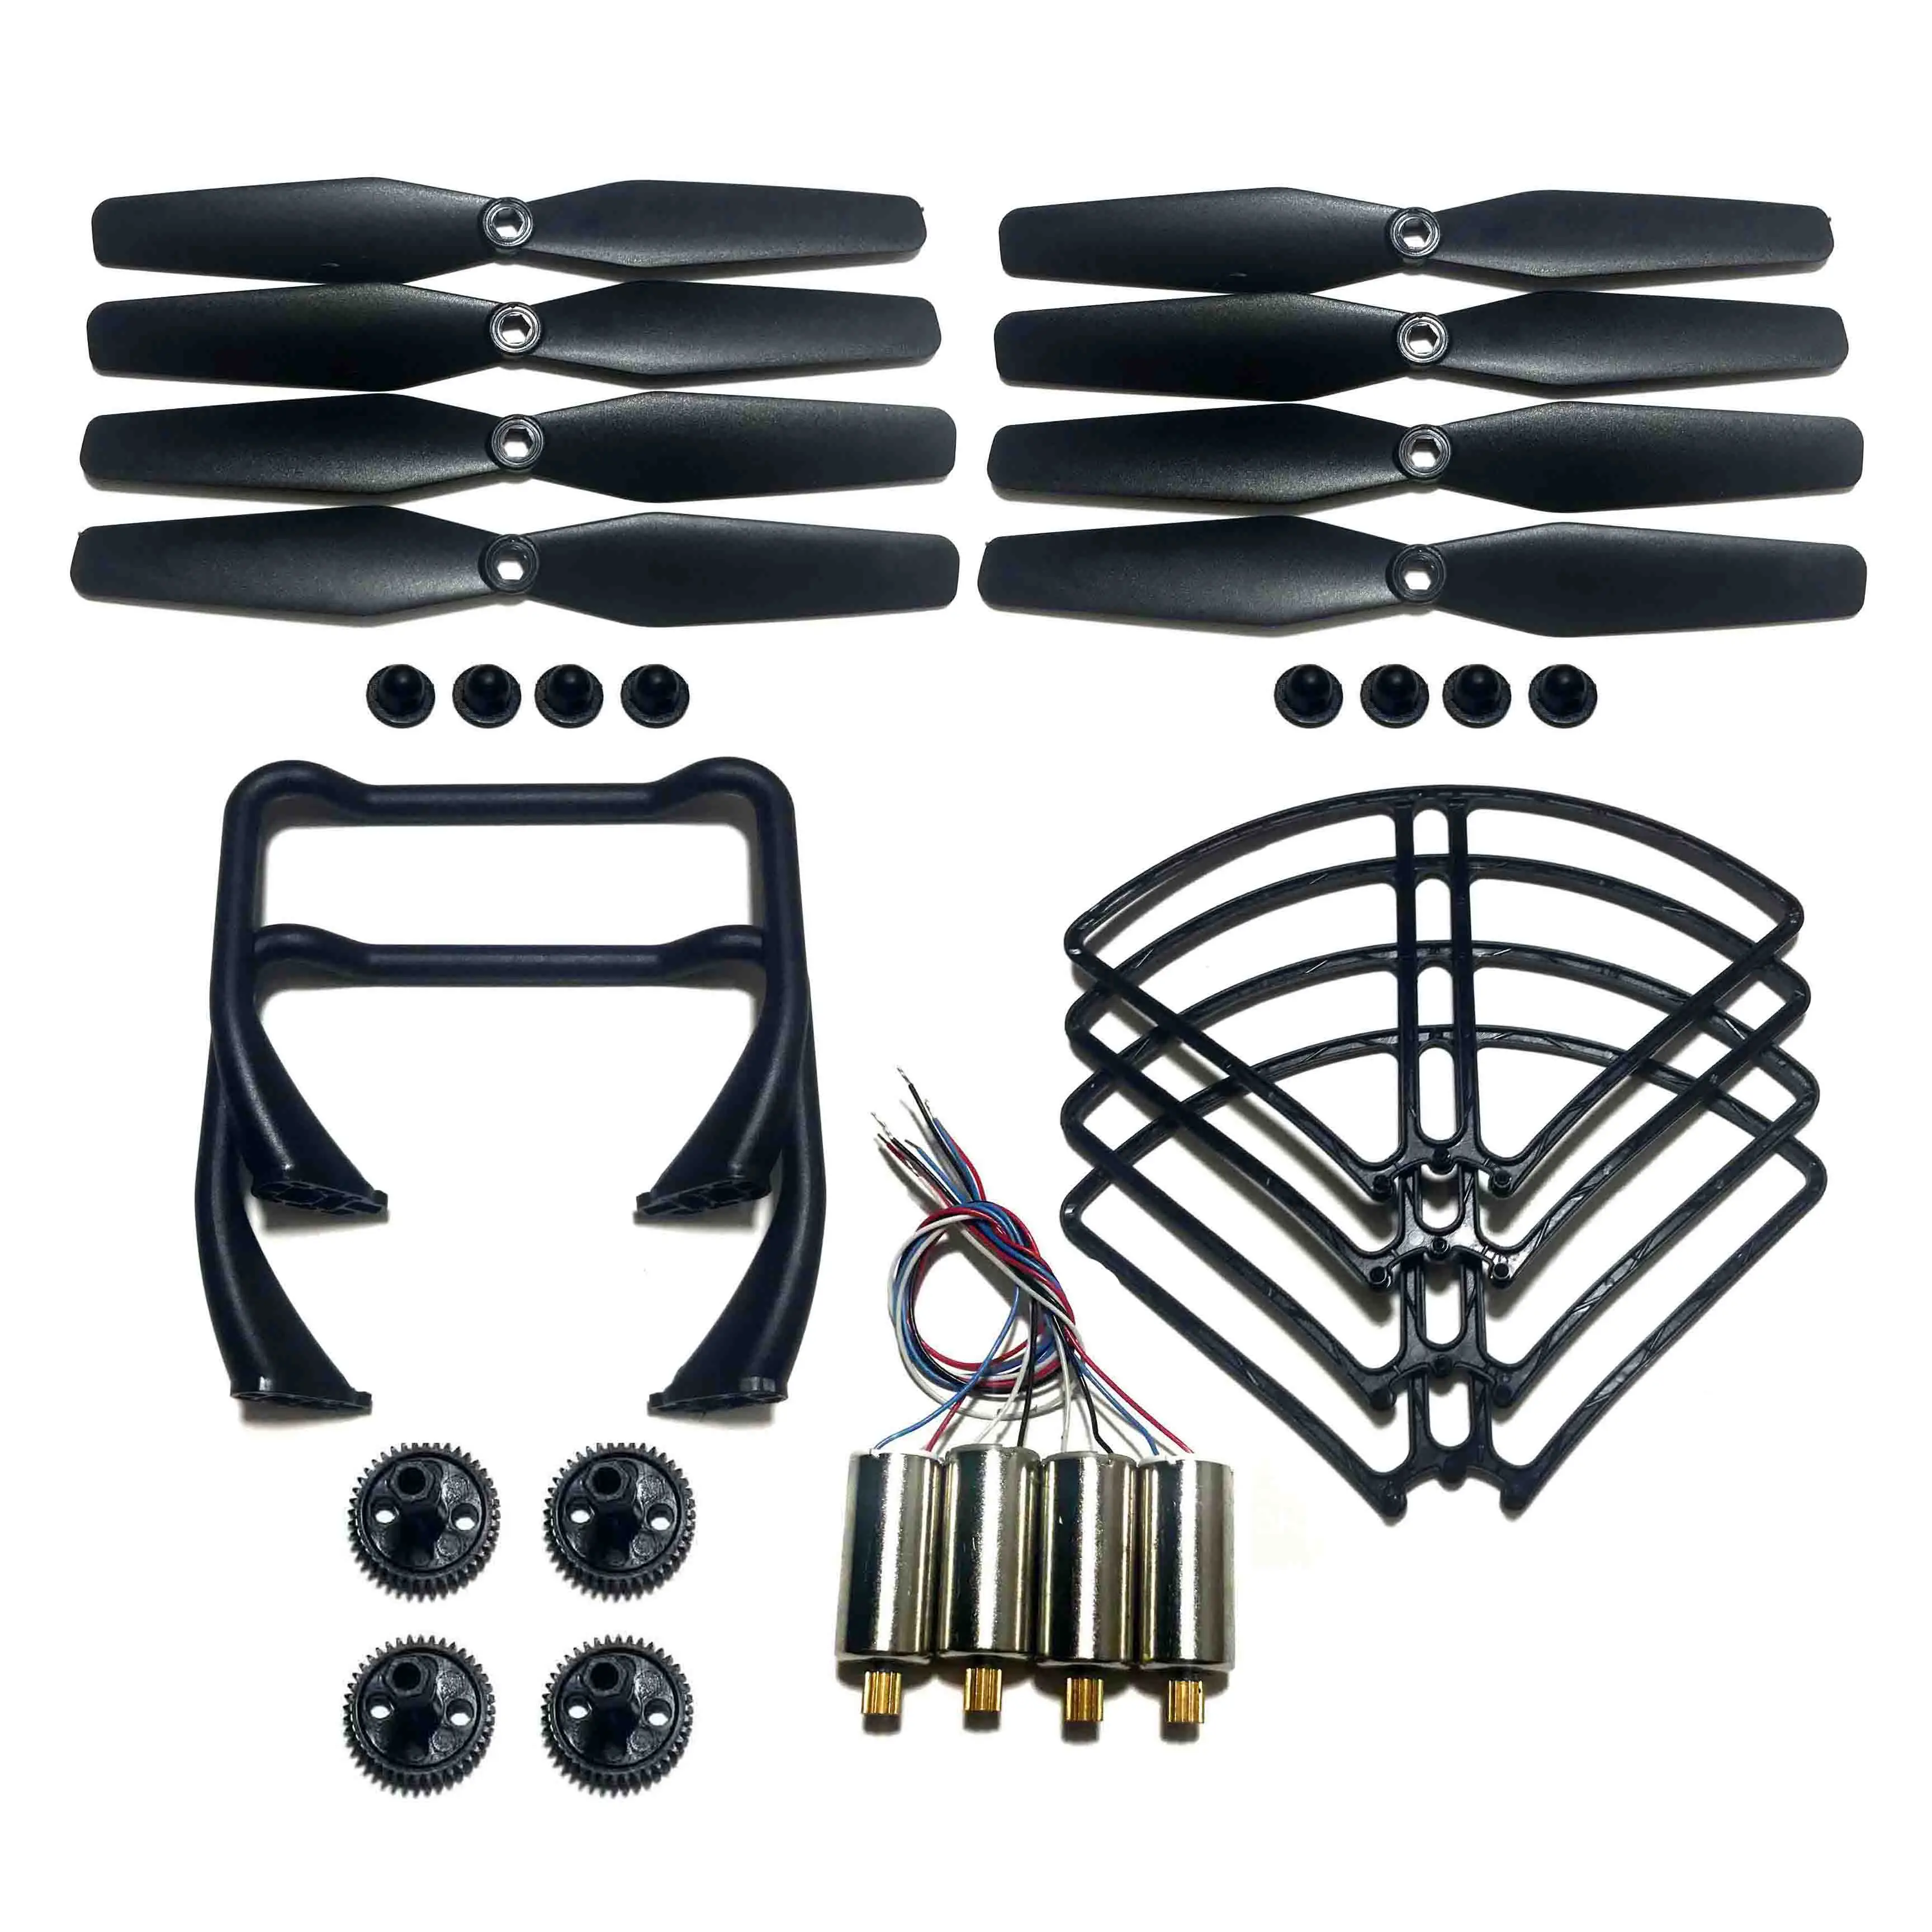 

SJRC Drone S20 S20W S30 S30W RC Quadcopter spare parts Engines CW CCW motor propeller blades guards gear set